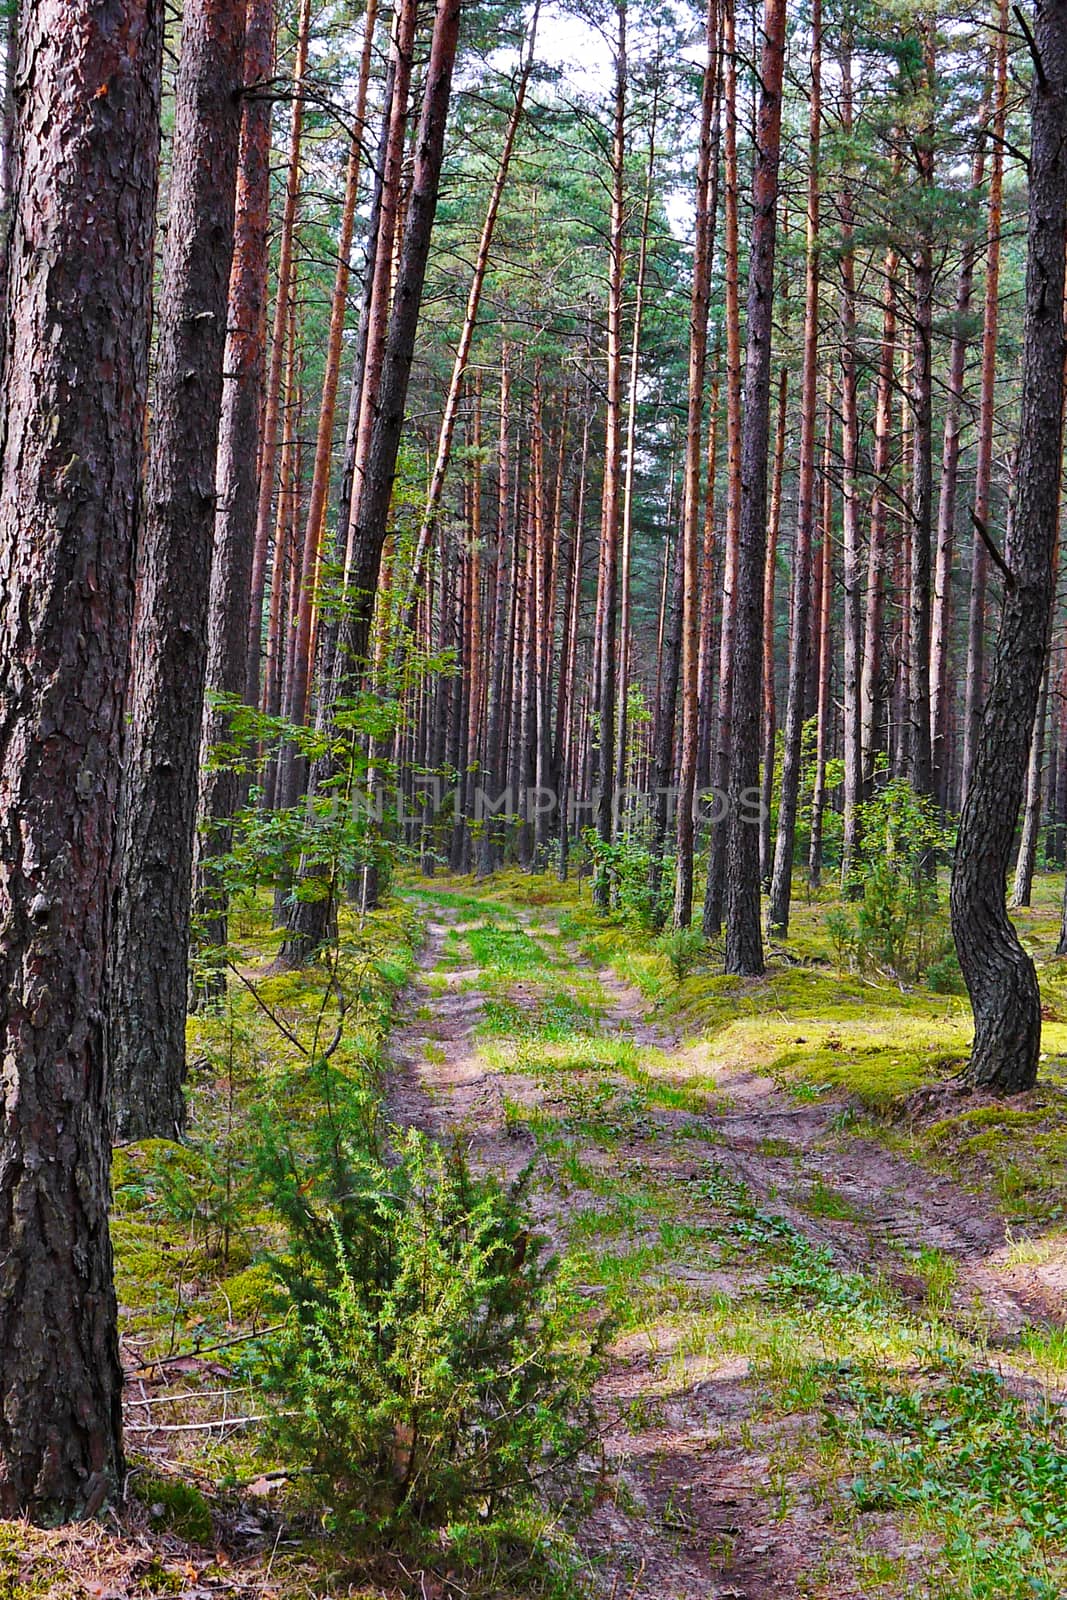 A path in a pine forest. Slender trees with spines